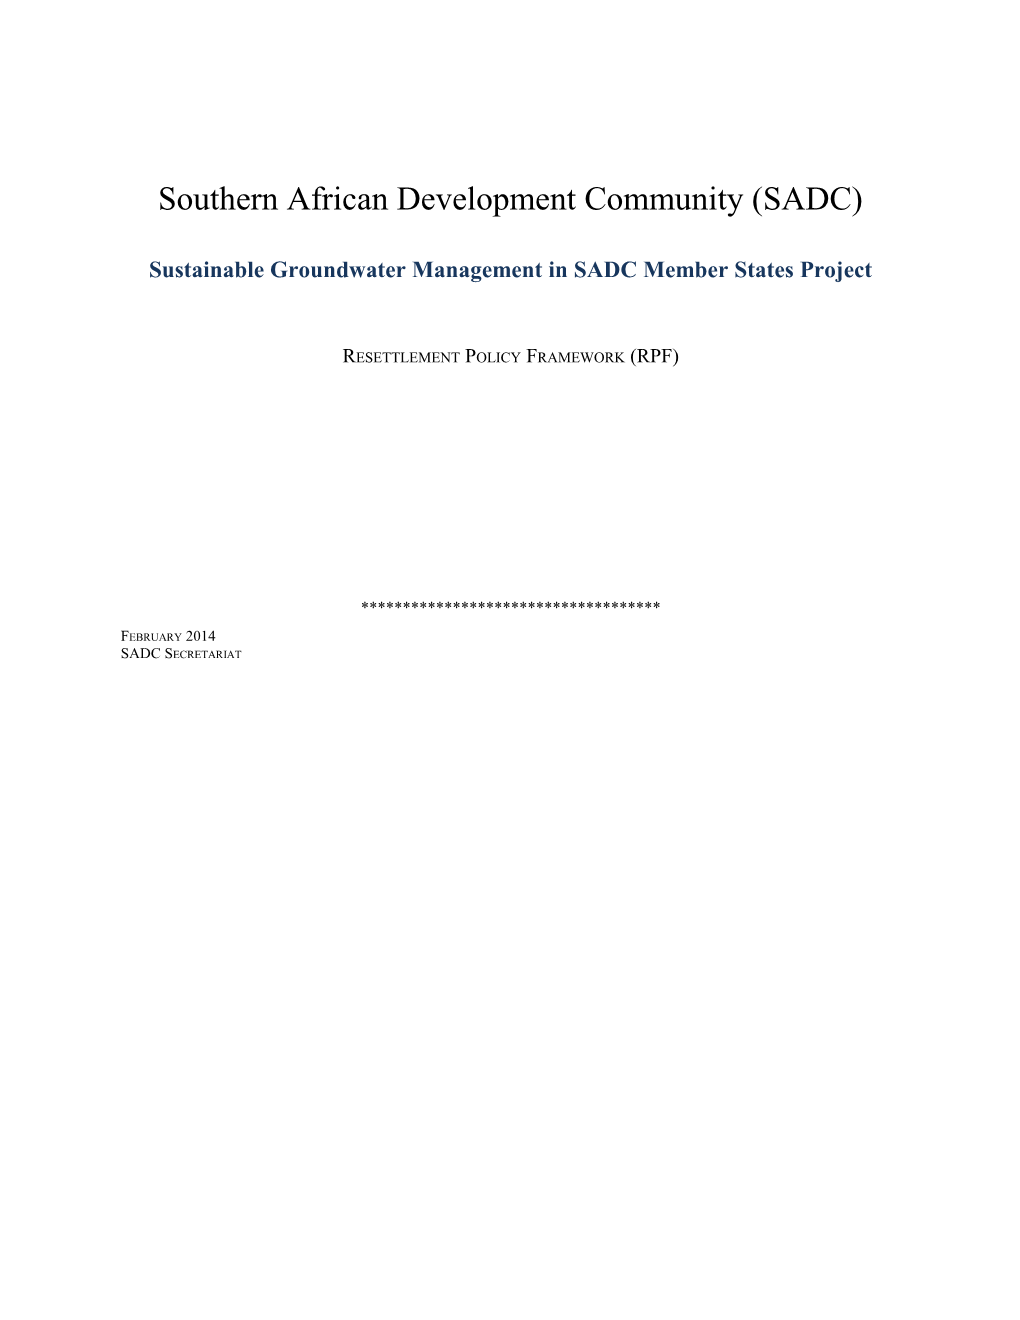 Sustainable Groundwater Management in SADC Member States Project